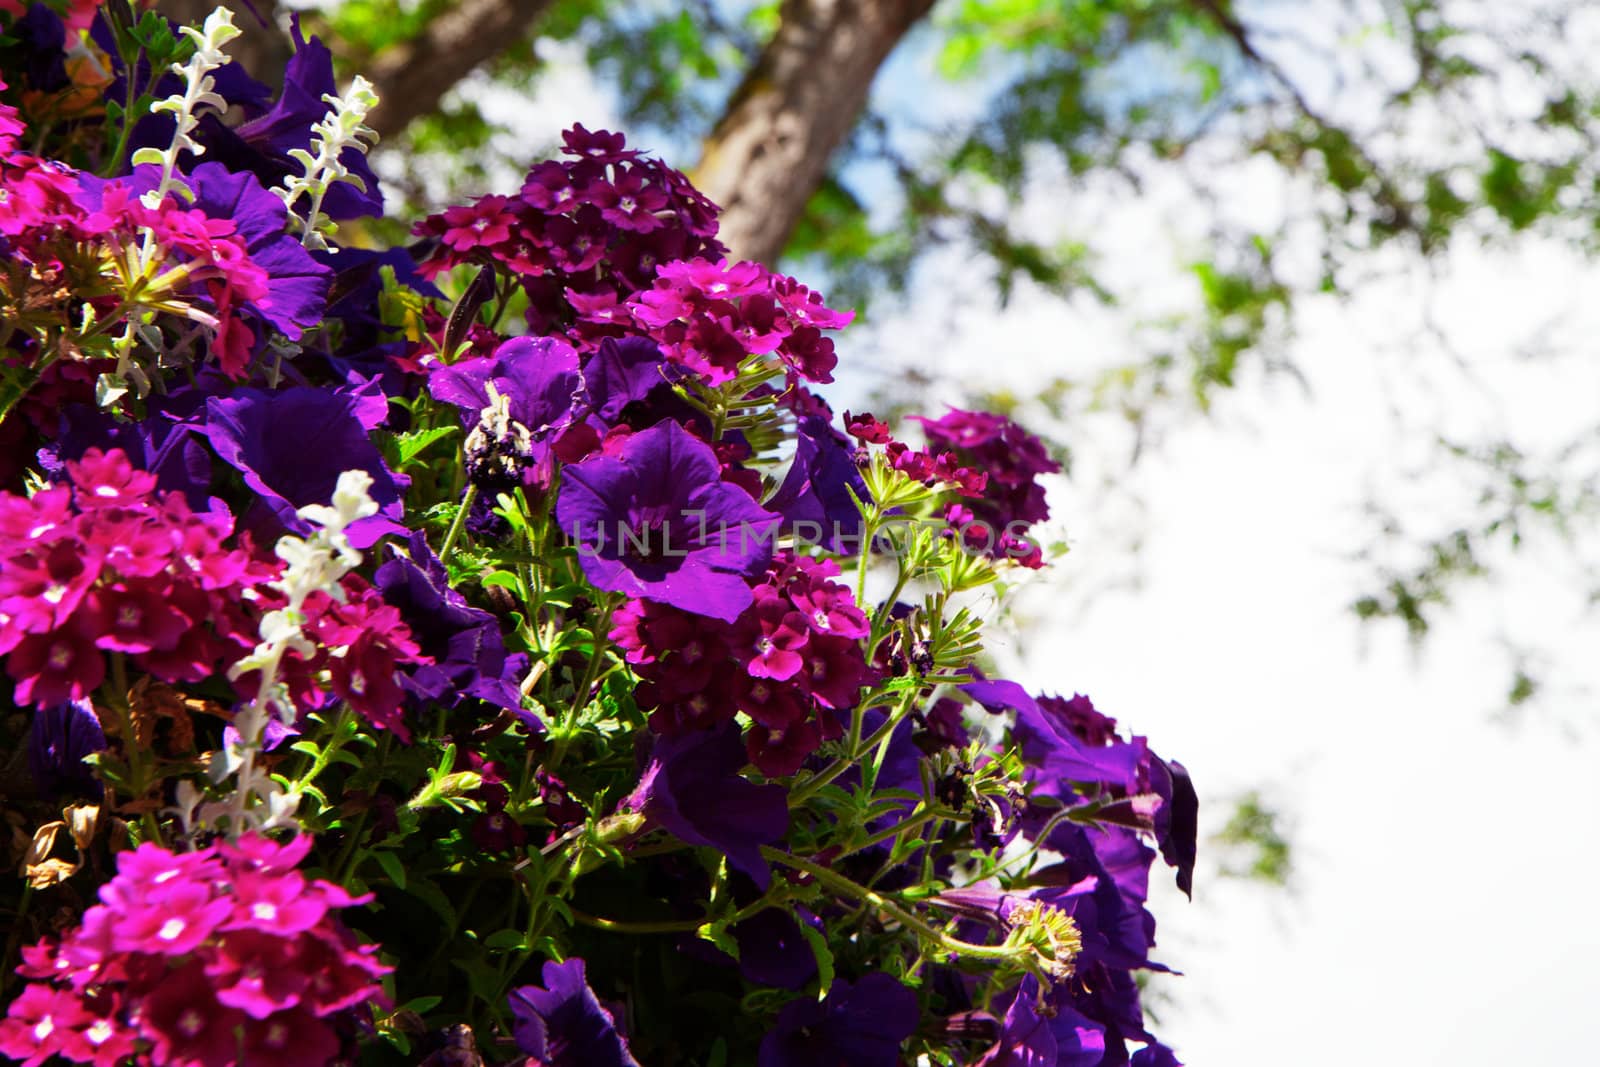 Dark Purple Petunias with other violet flowers against soft focus tree